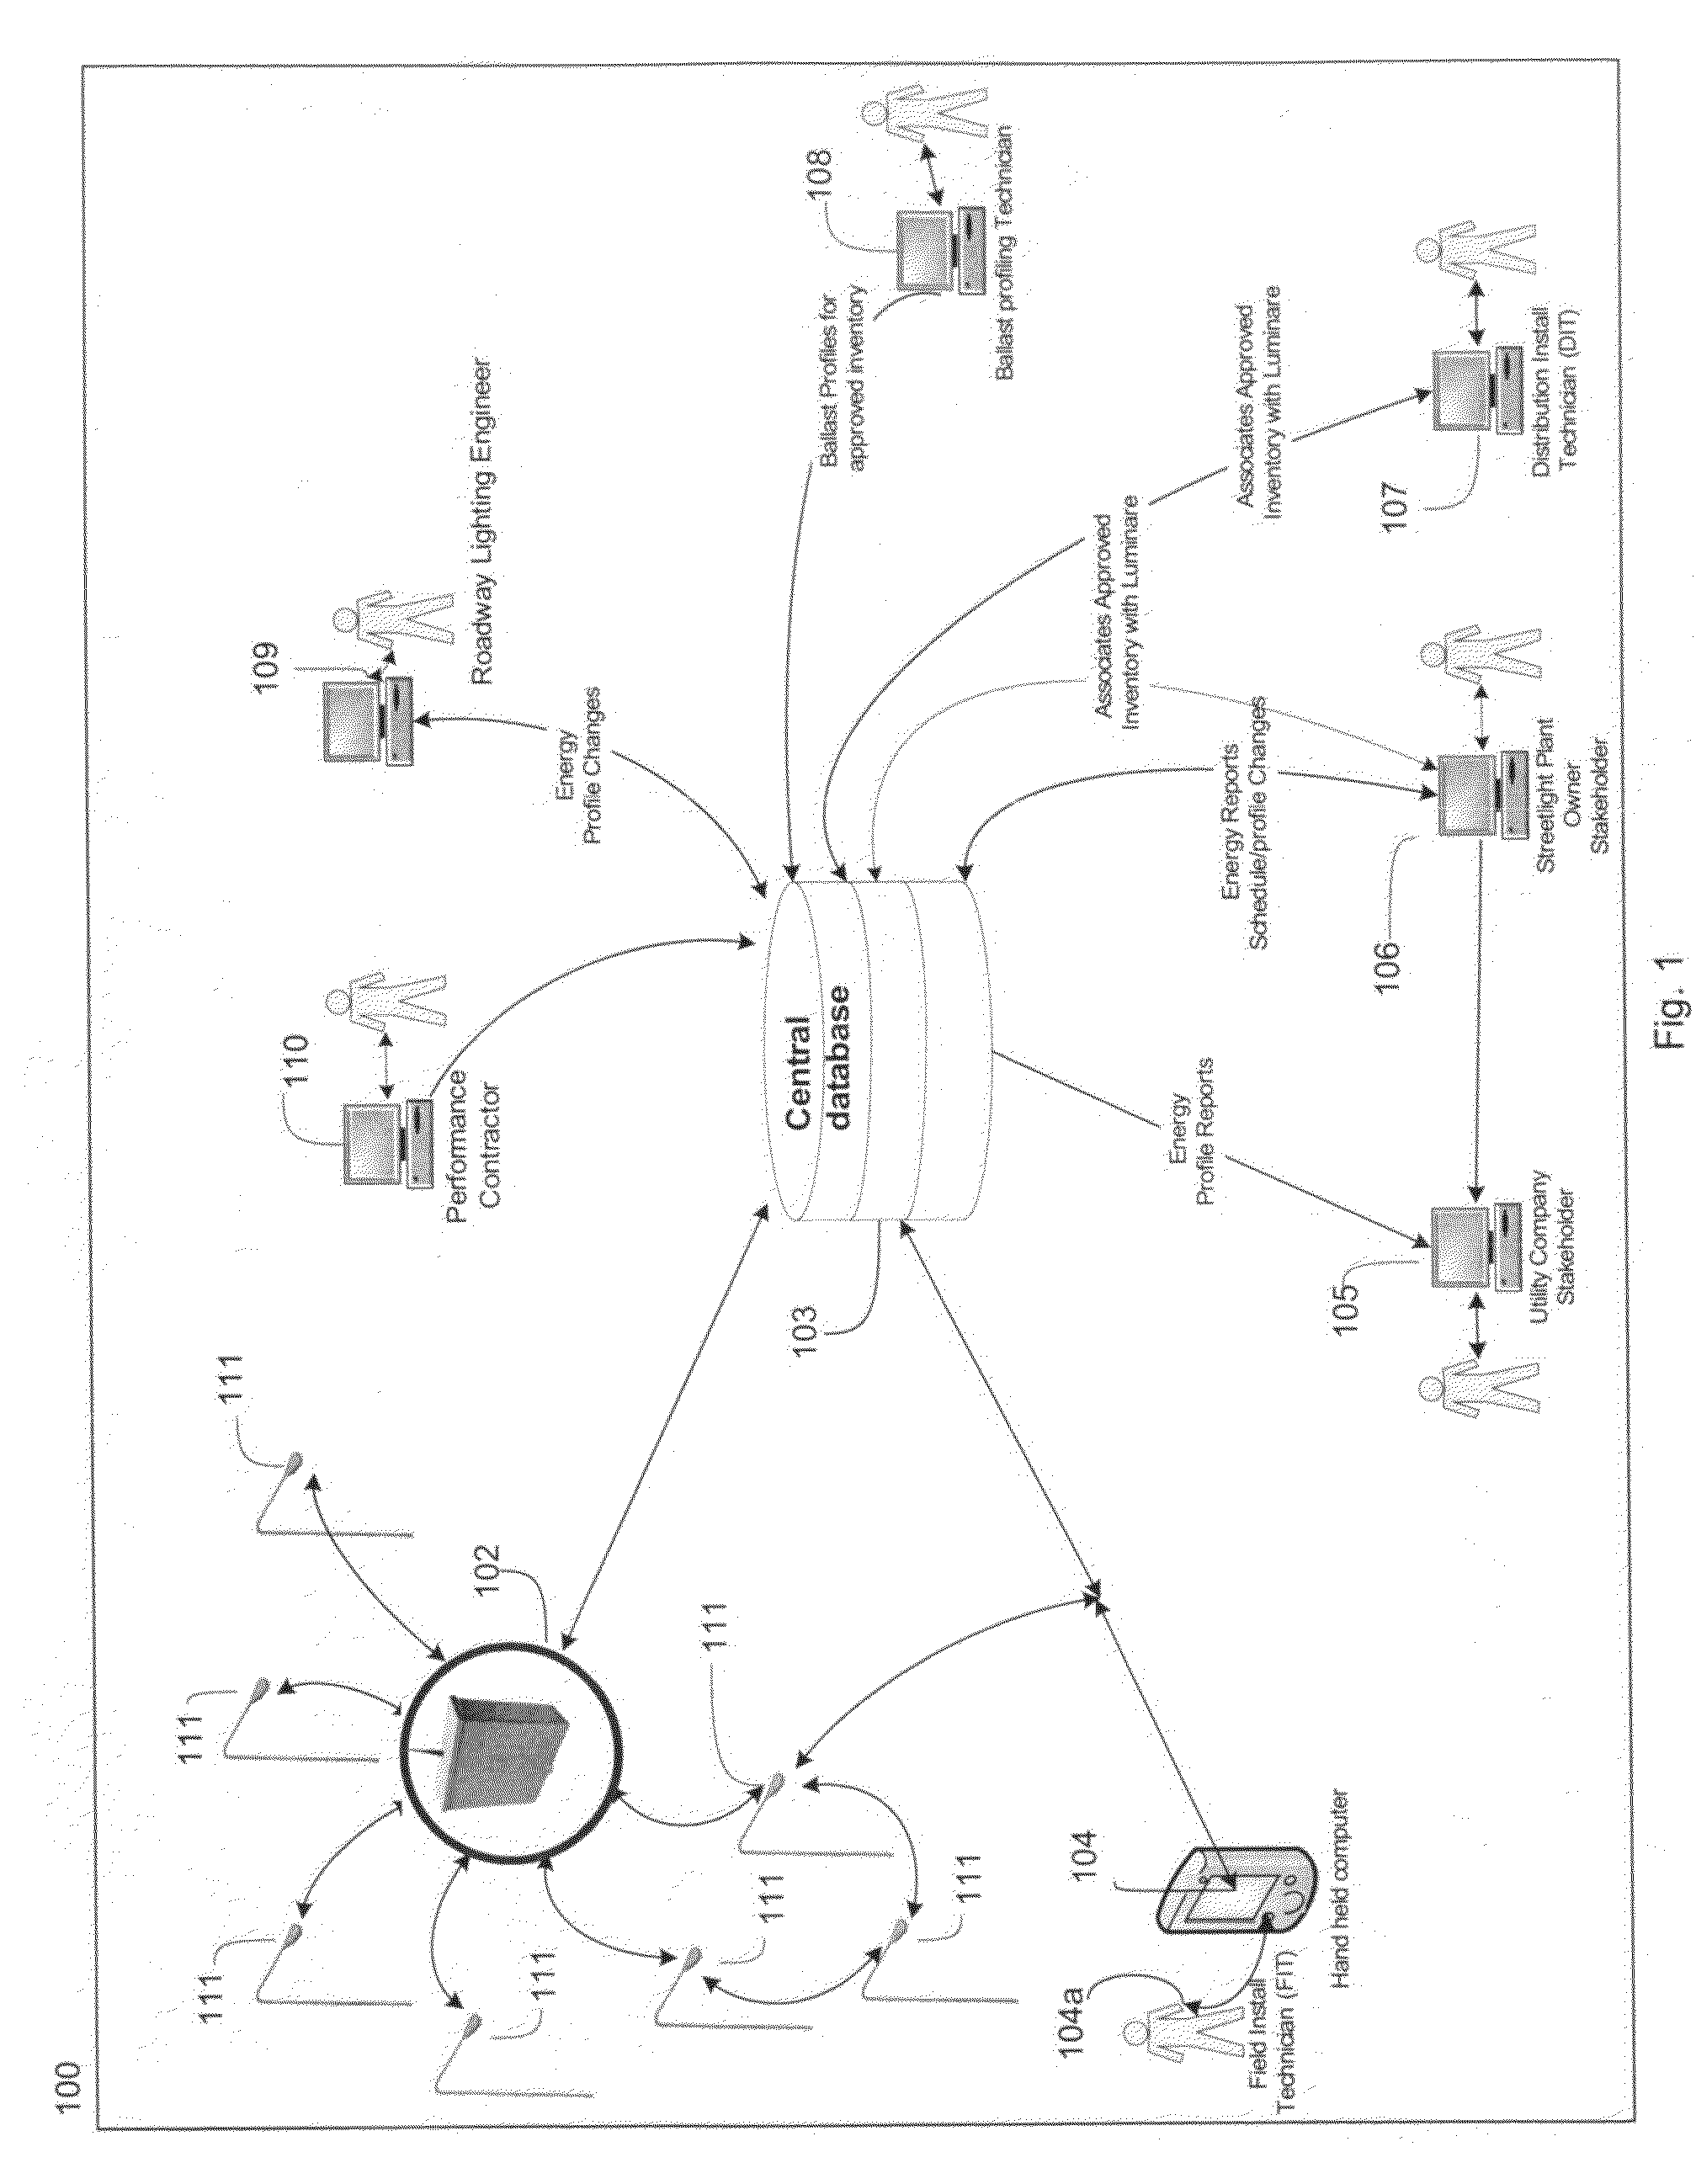 Centralized route calculation for a multi-hop streetlight network